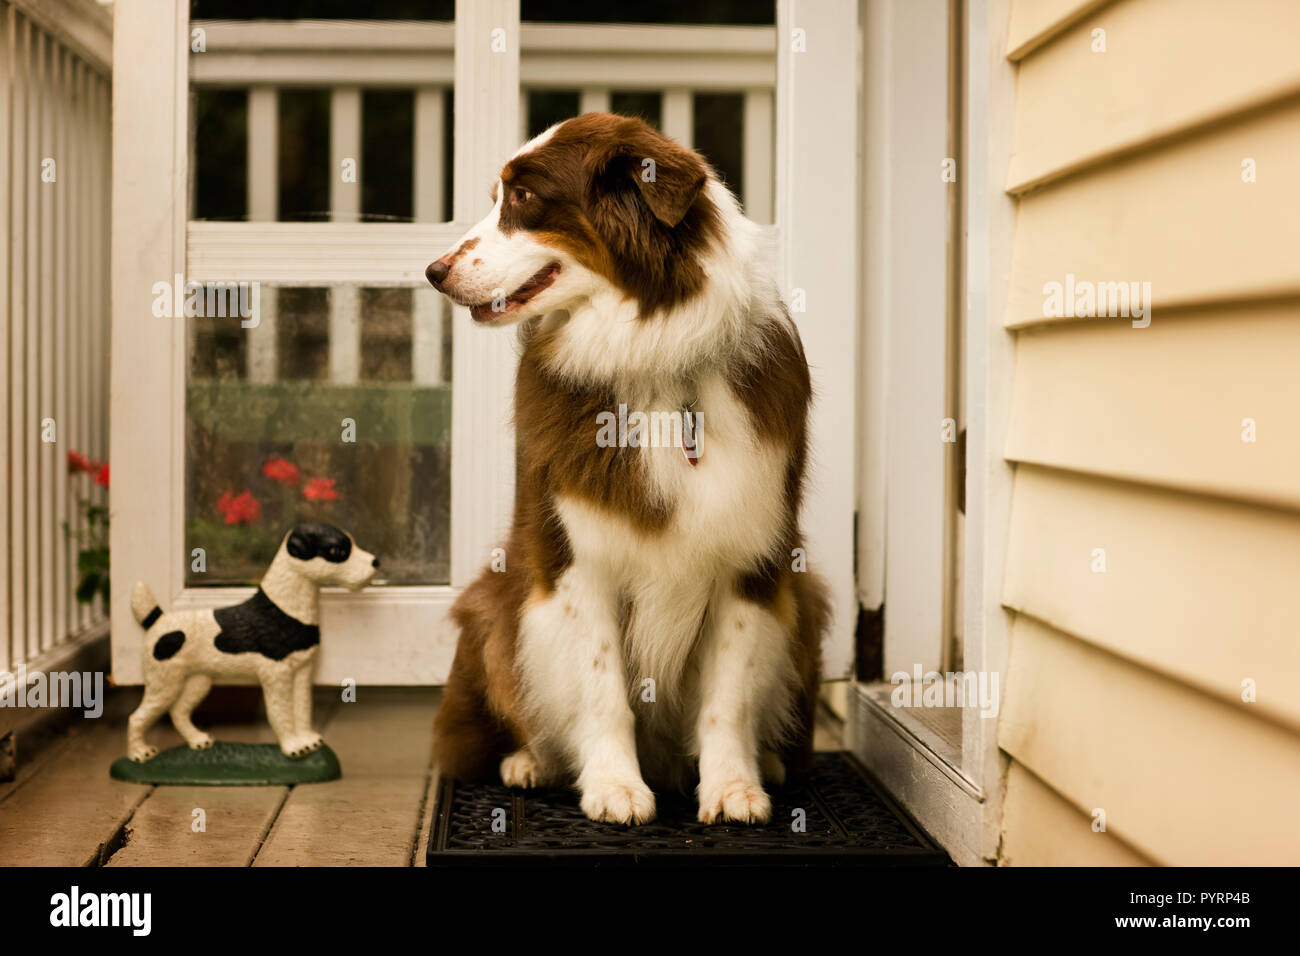 Dog waiting patiently in a doorway to be let inside. Stock Photo